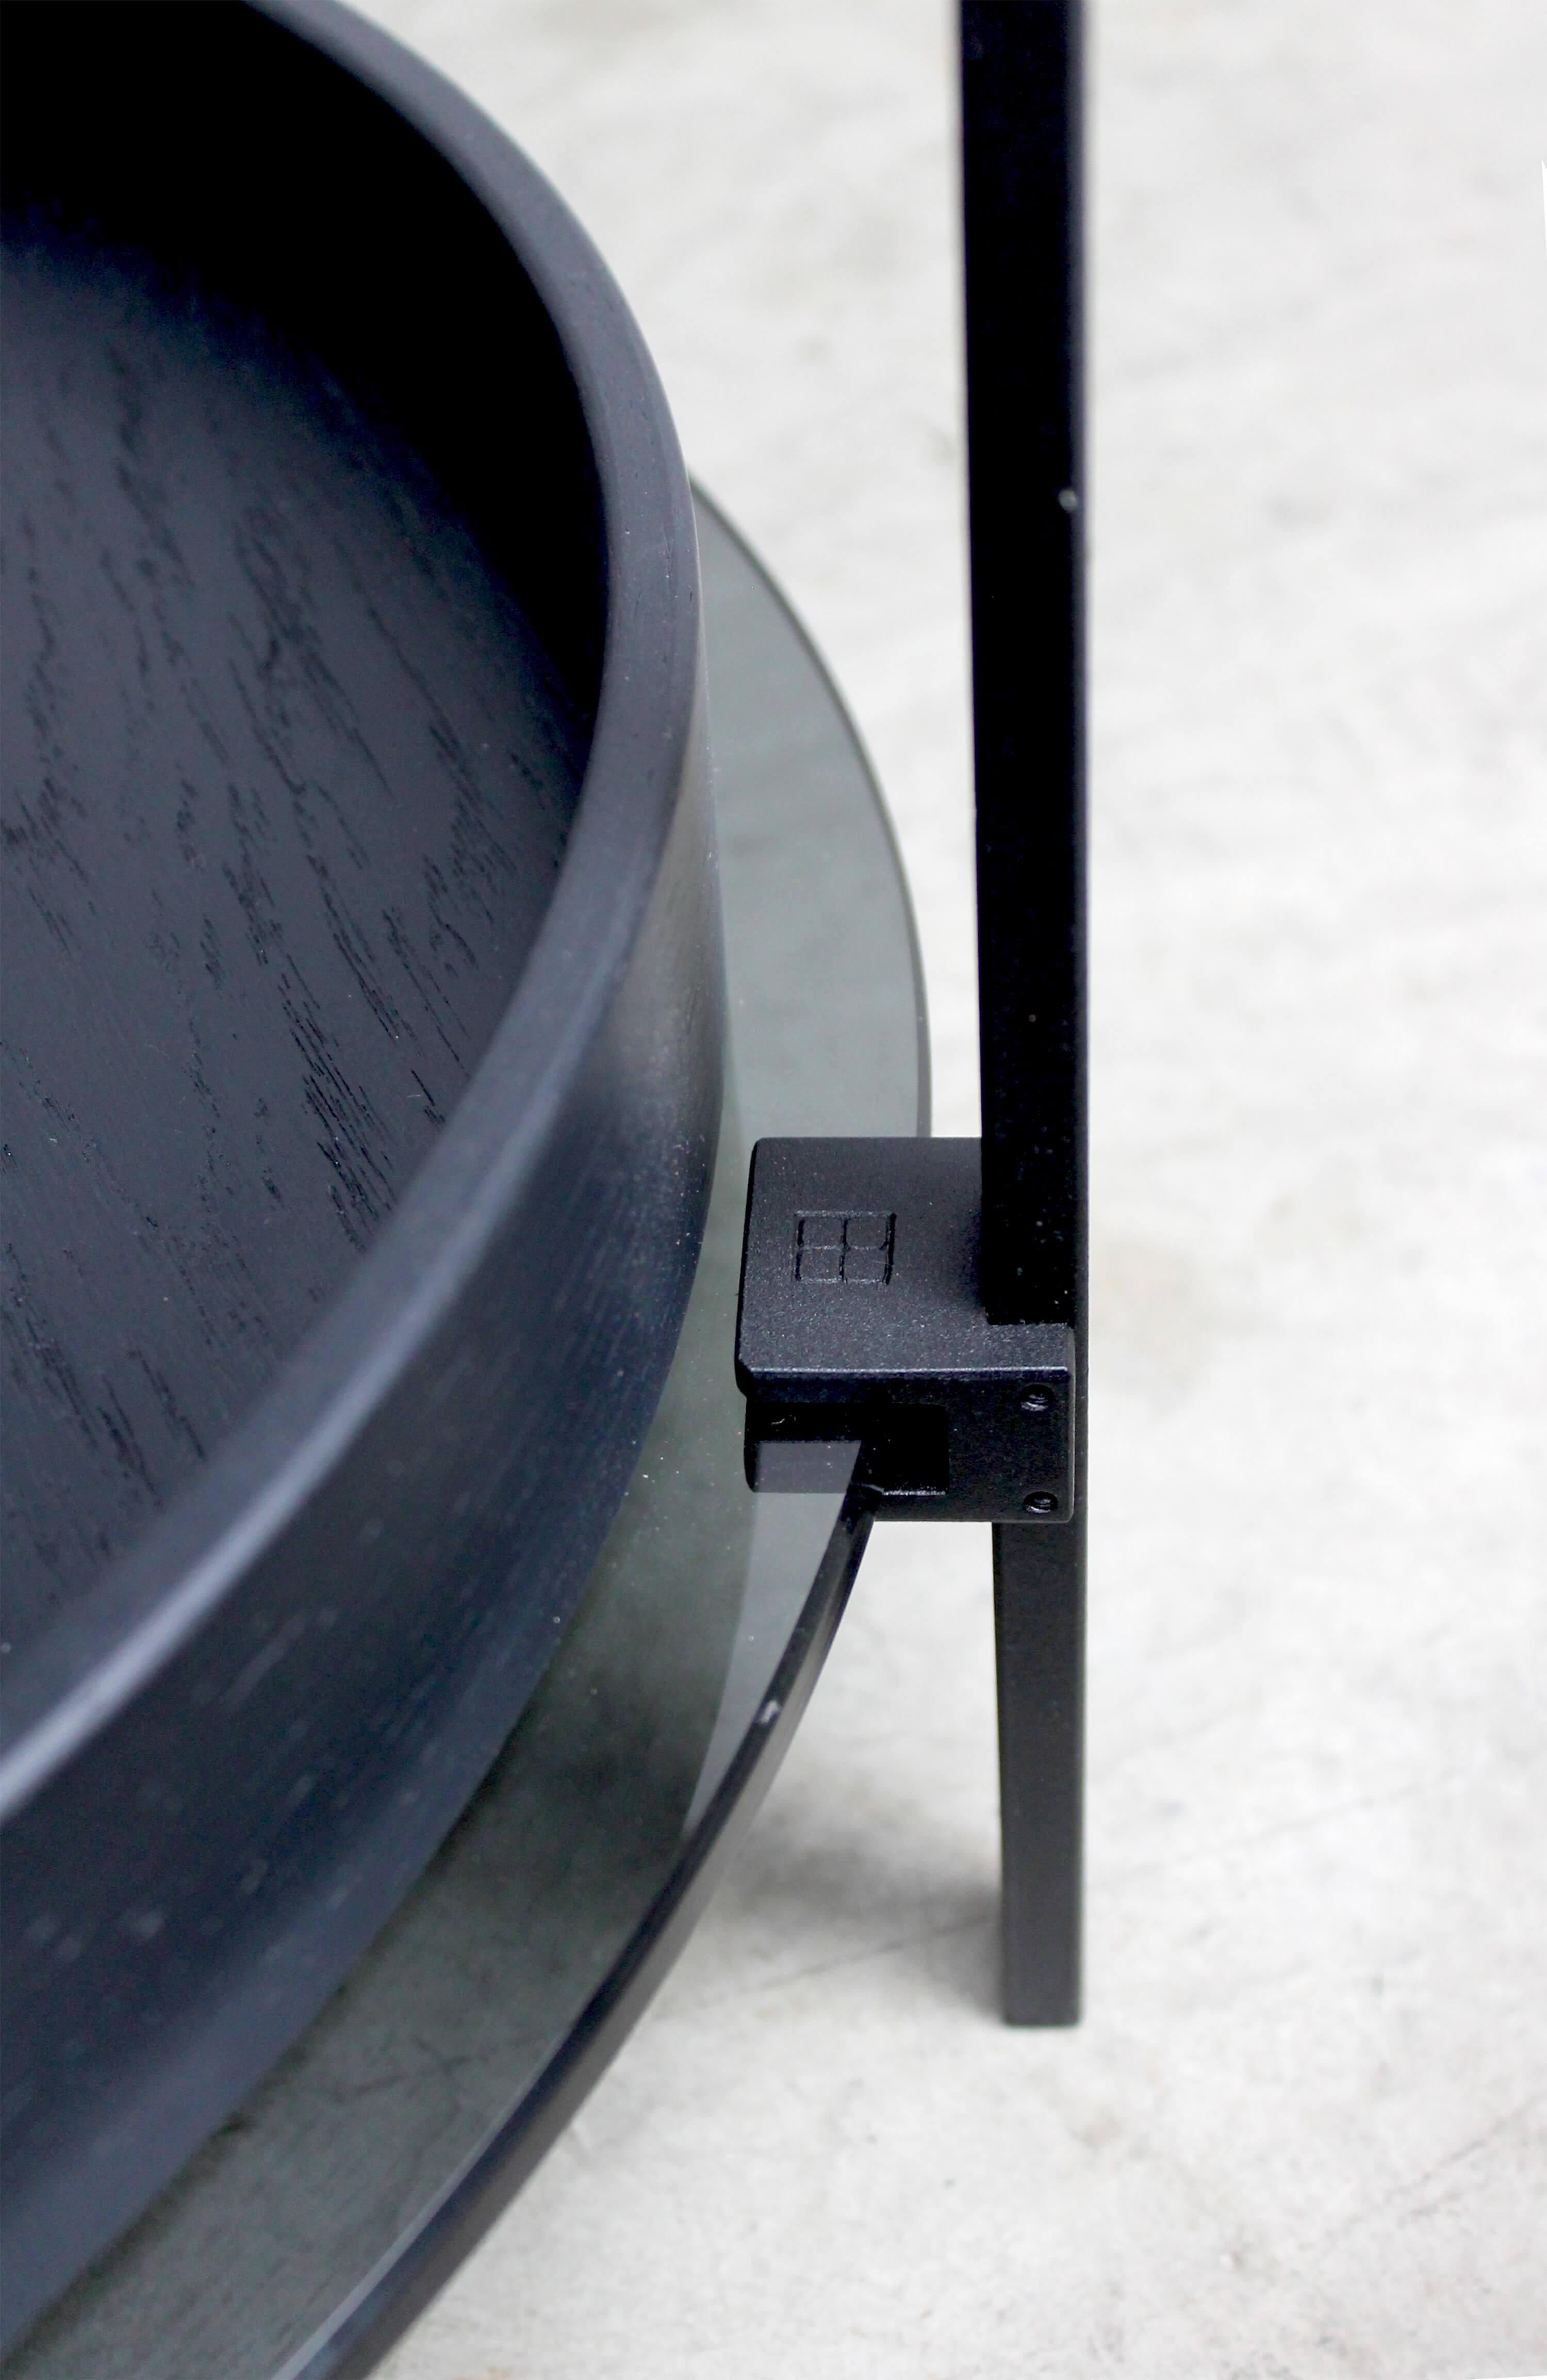 This mid century modern minimalist 'Amy' T79DB side table was designed by Peter Ghyczy in 2015 and hand-crafted in the GHYCZY atelier in the South of the Netherlands. The circular minimalist side table features a three-leg black charcoal metal